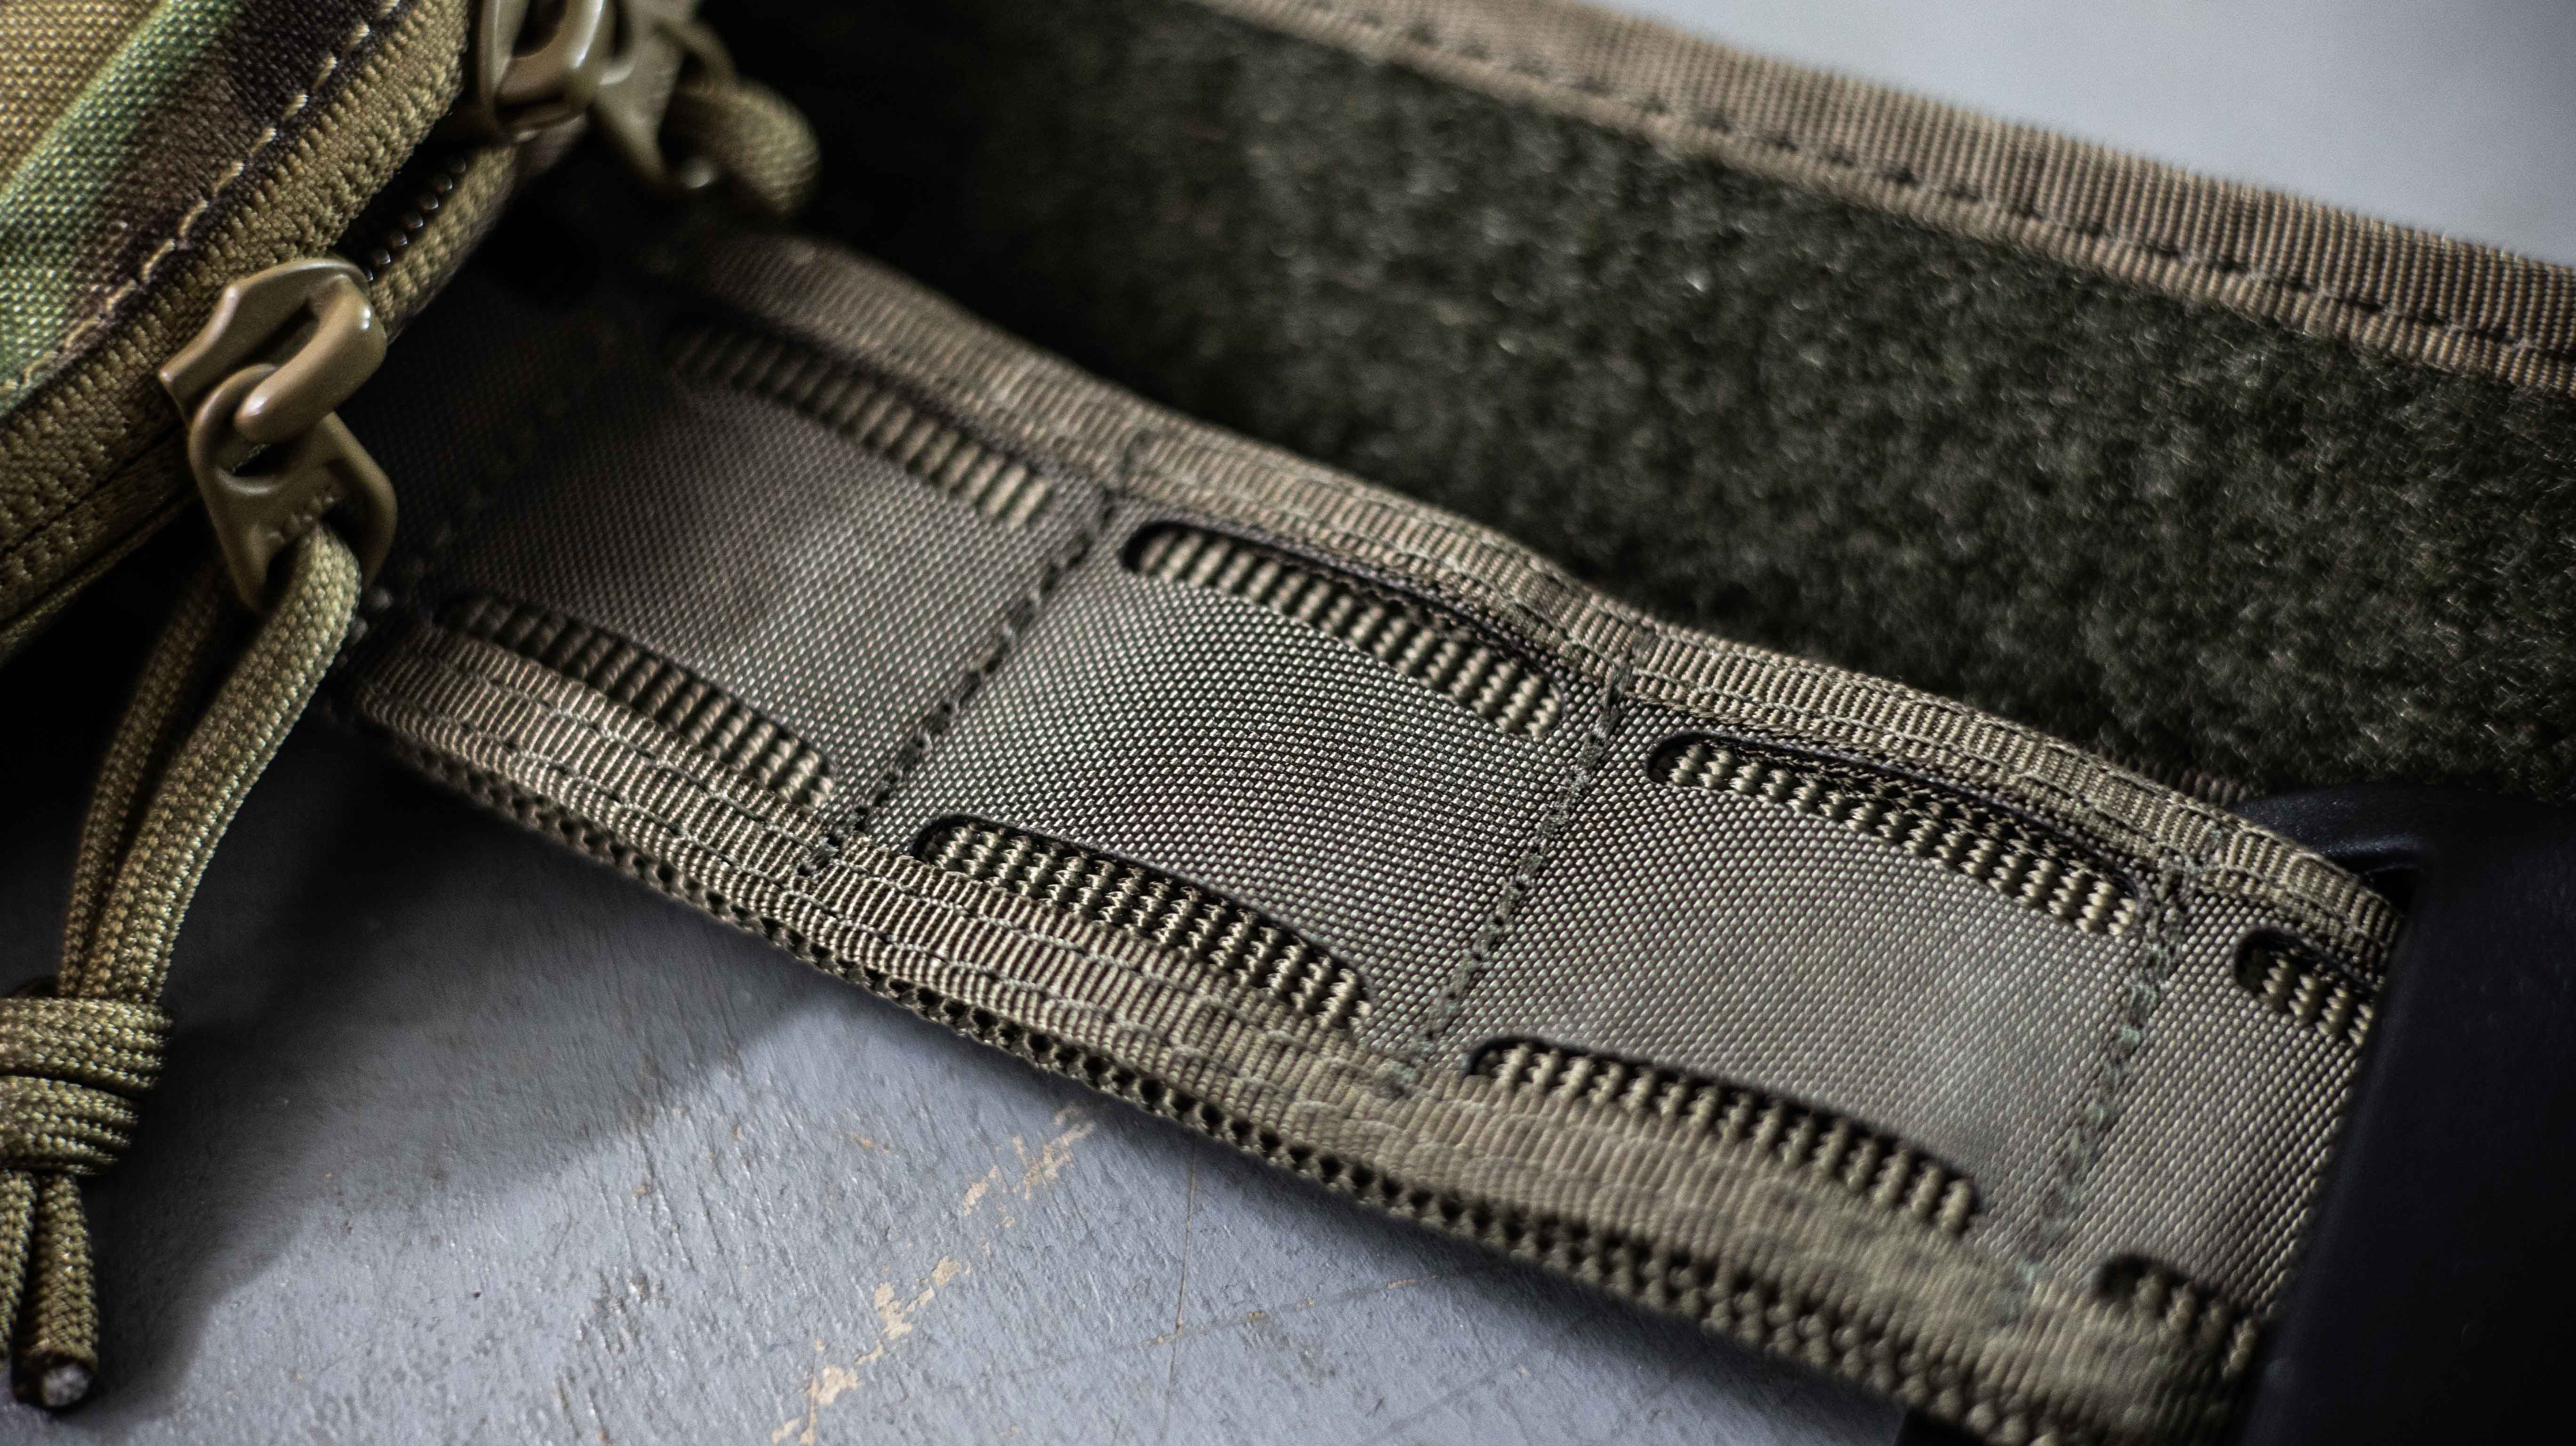 AO Review: 5.11 Tactical Maverick EDC 1.5 Belt - Confidently Strapped